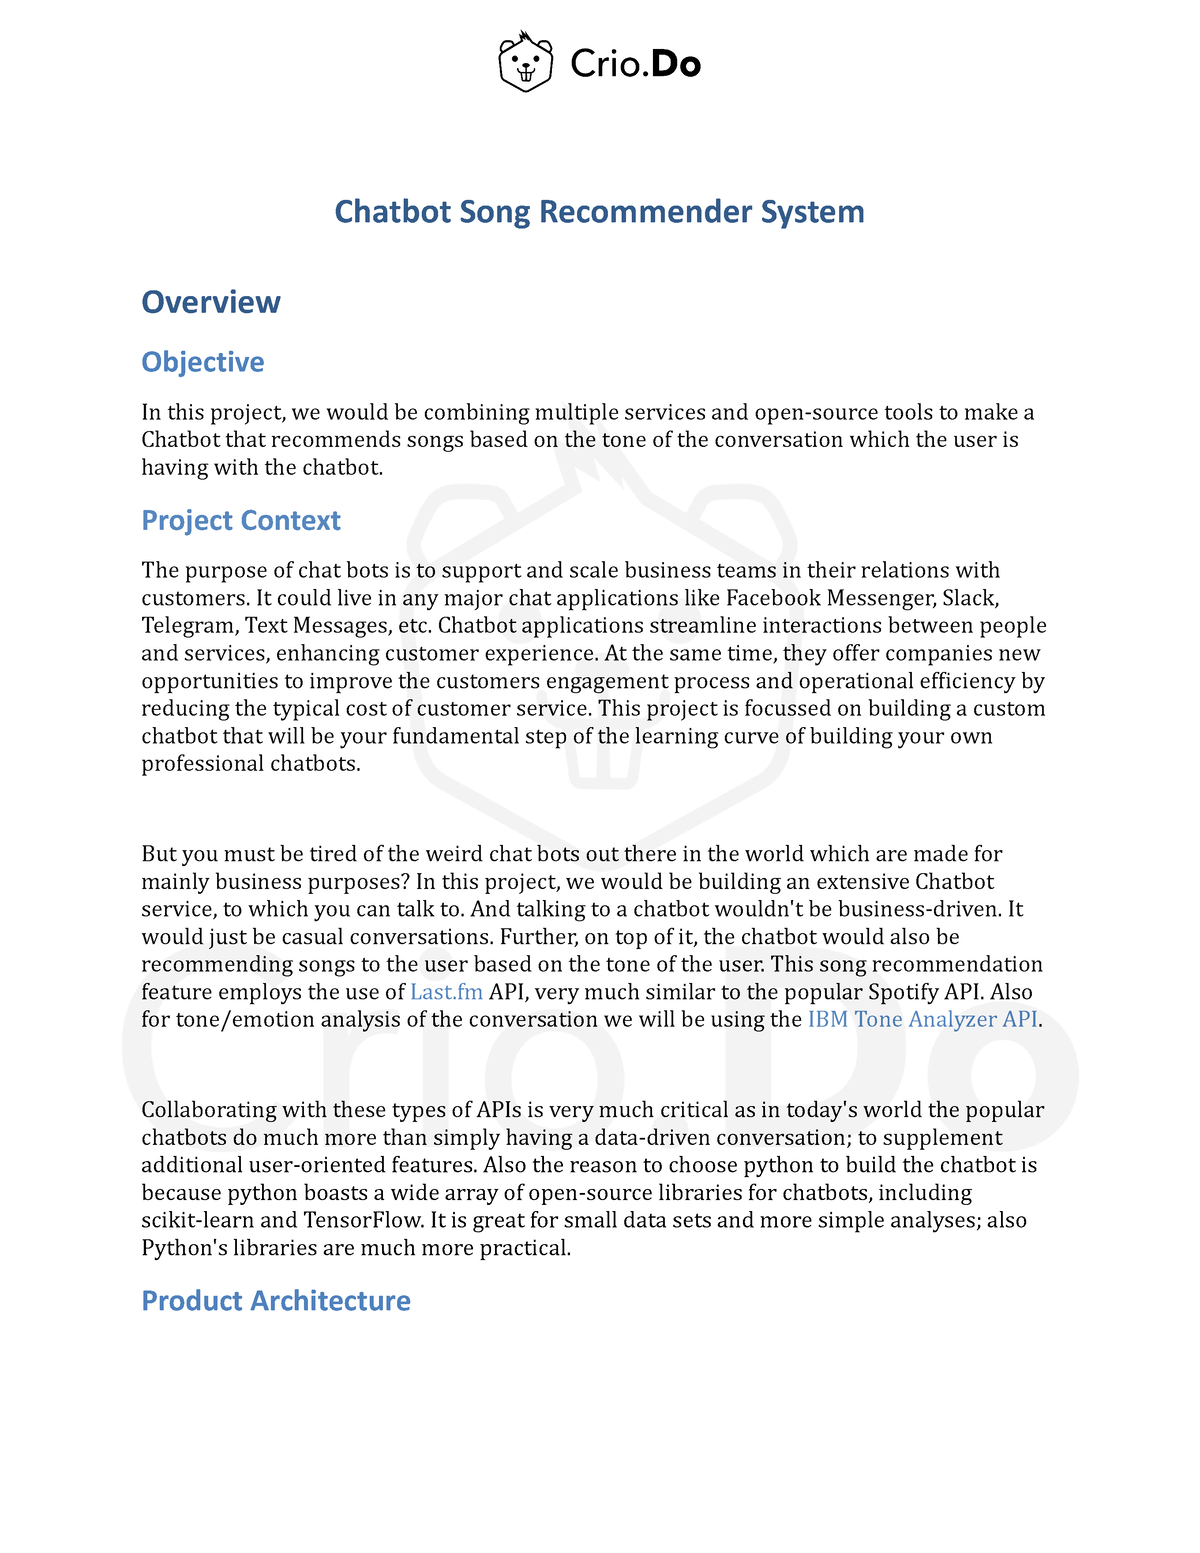 chatbot song recommender system research paper